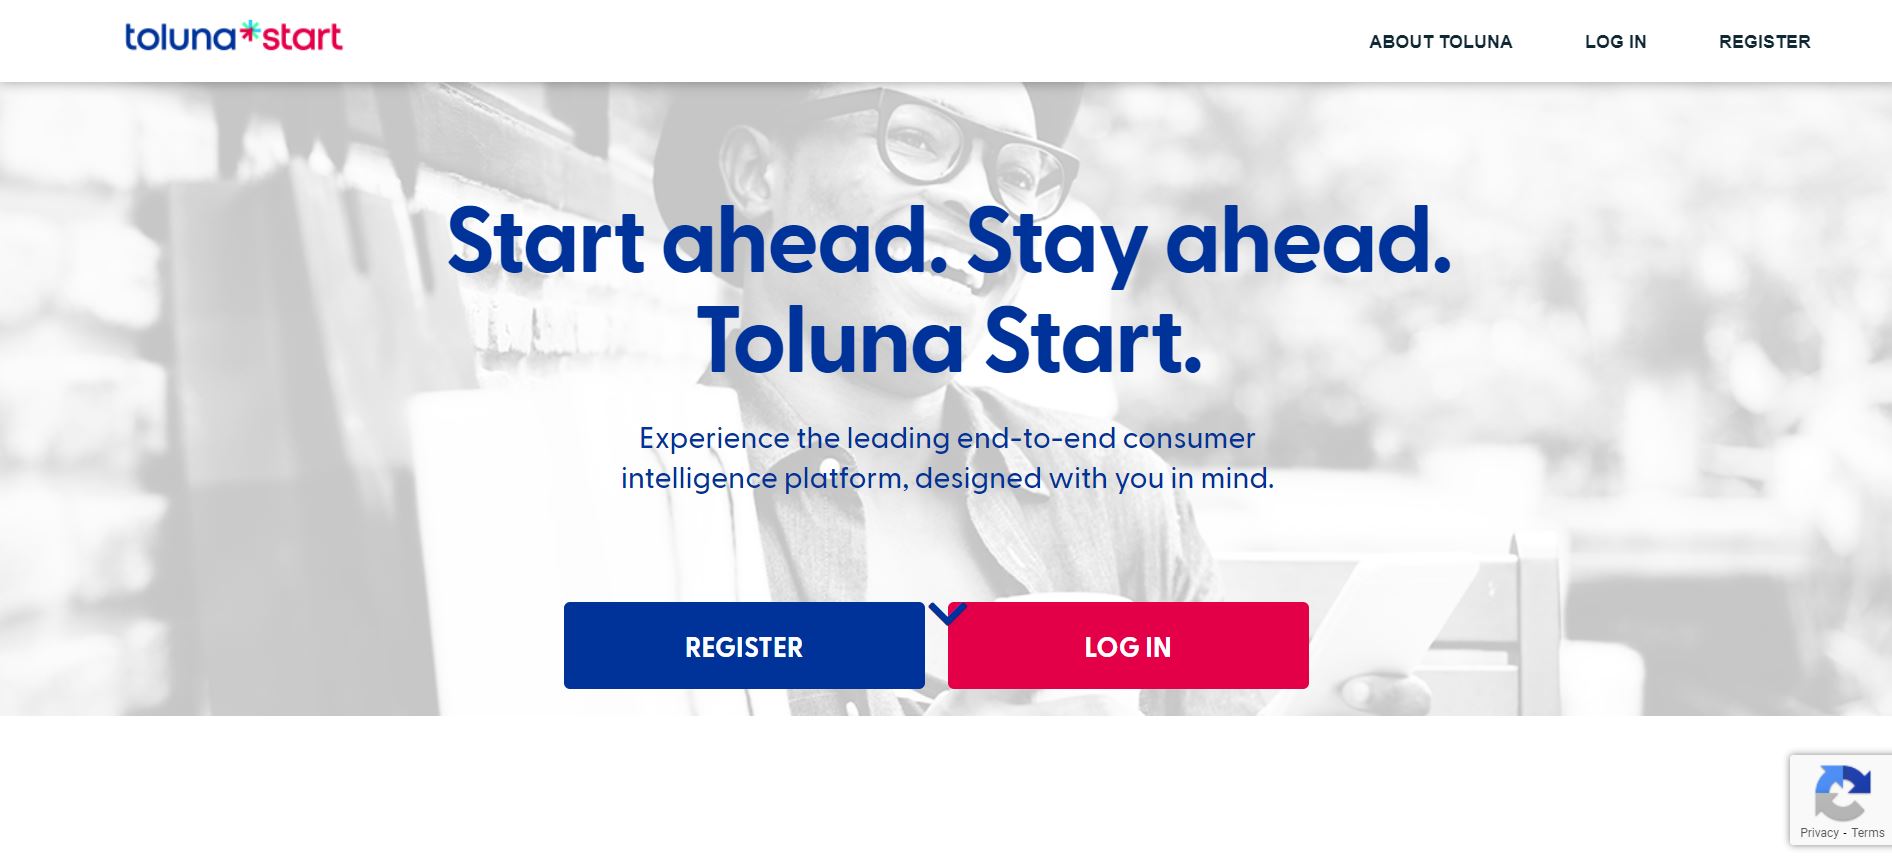 Get feedback from a vast remote working audience about Toluna Start